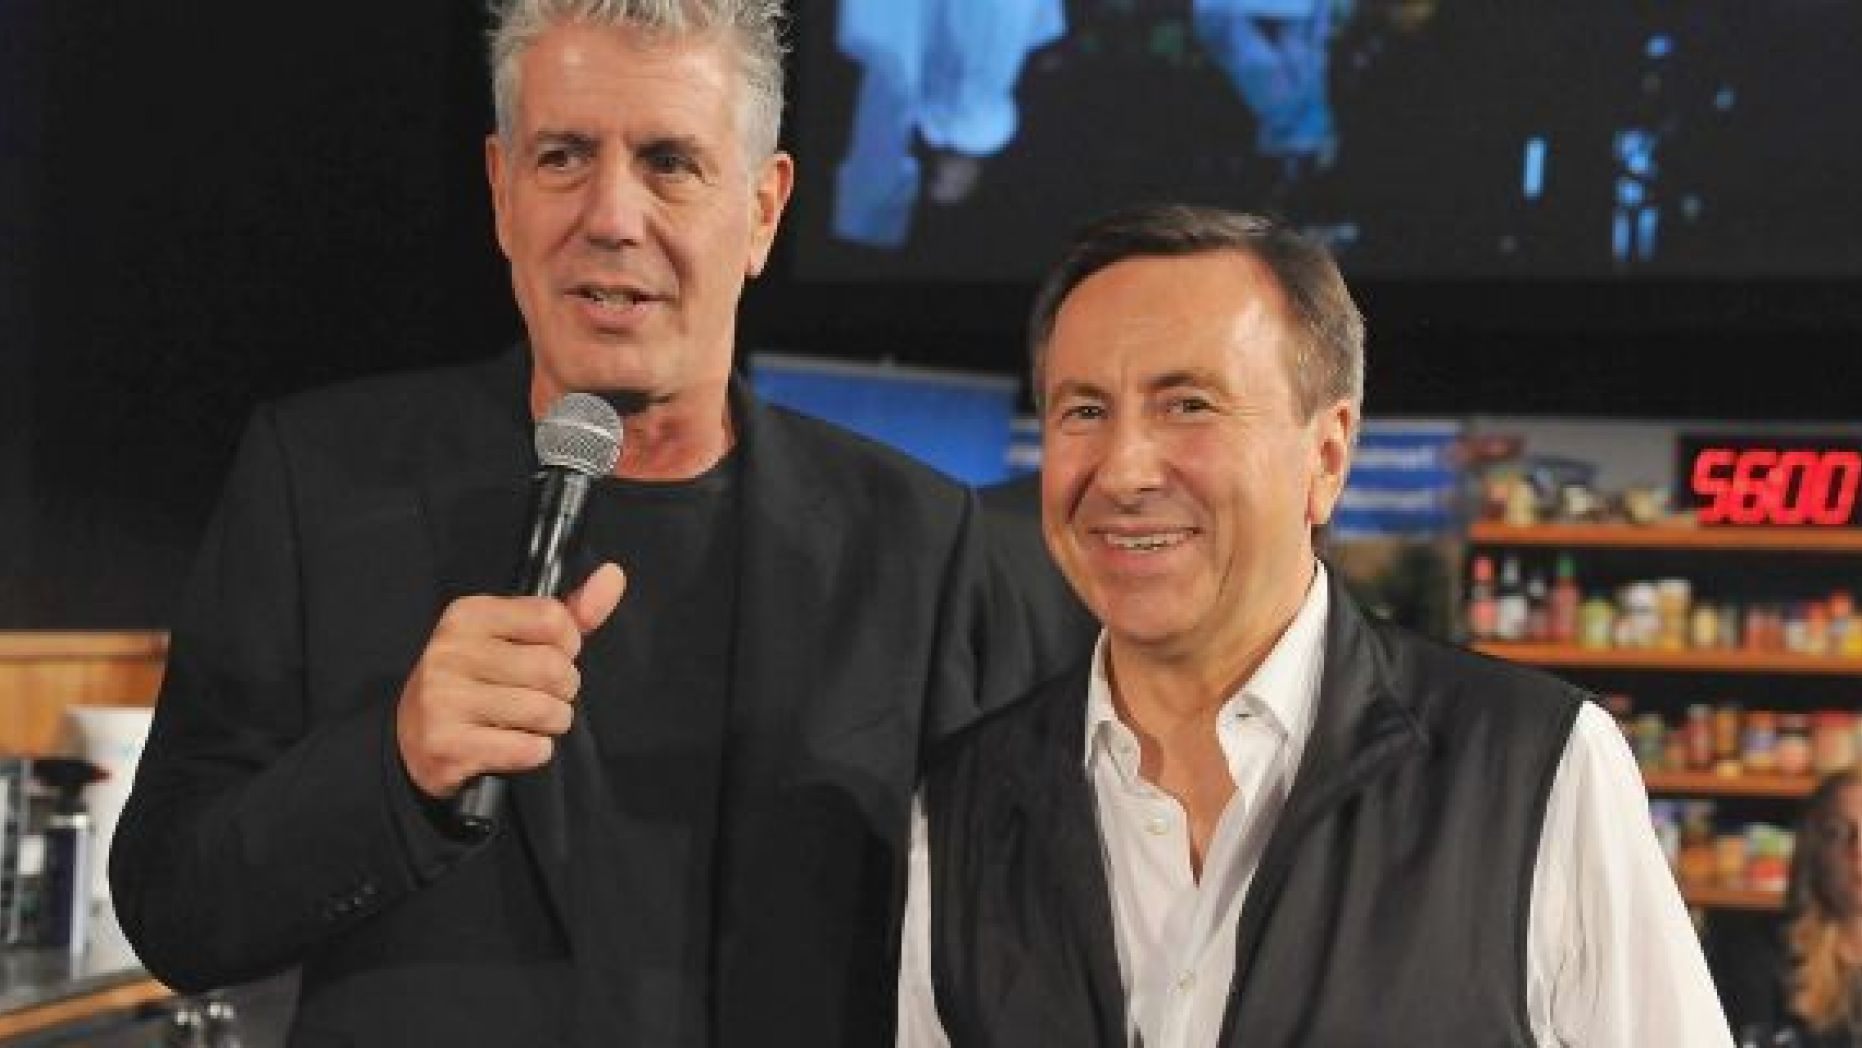 Chef Daniel Boulud recalls best moments with Anthony Bourdain and why he thinks he took his life. (Photo by Larry French/Getty Images for DC Central Kitchen)